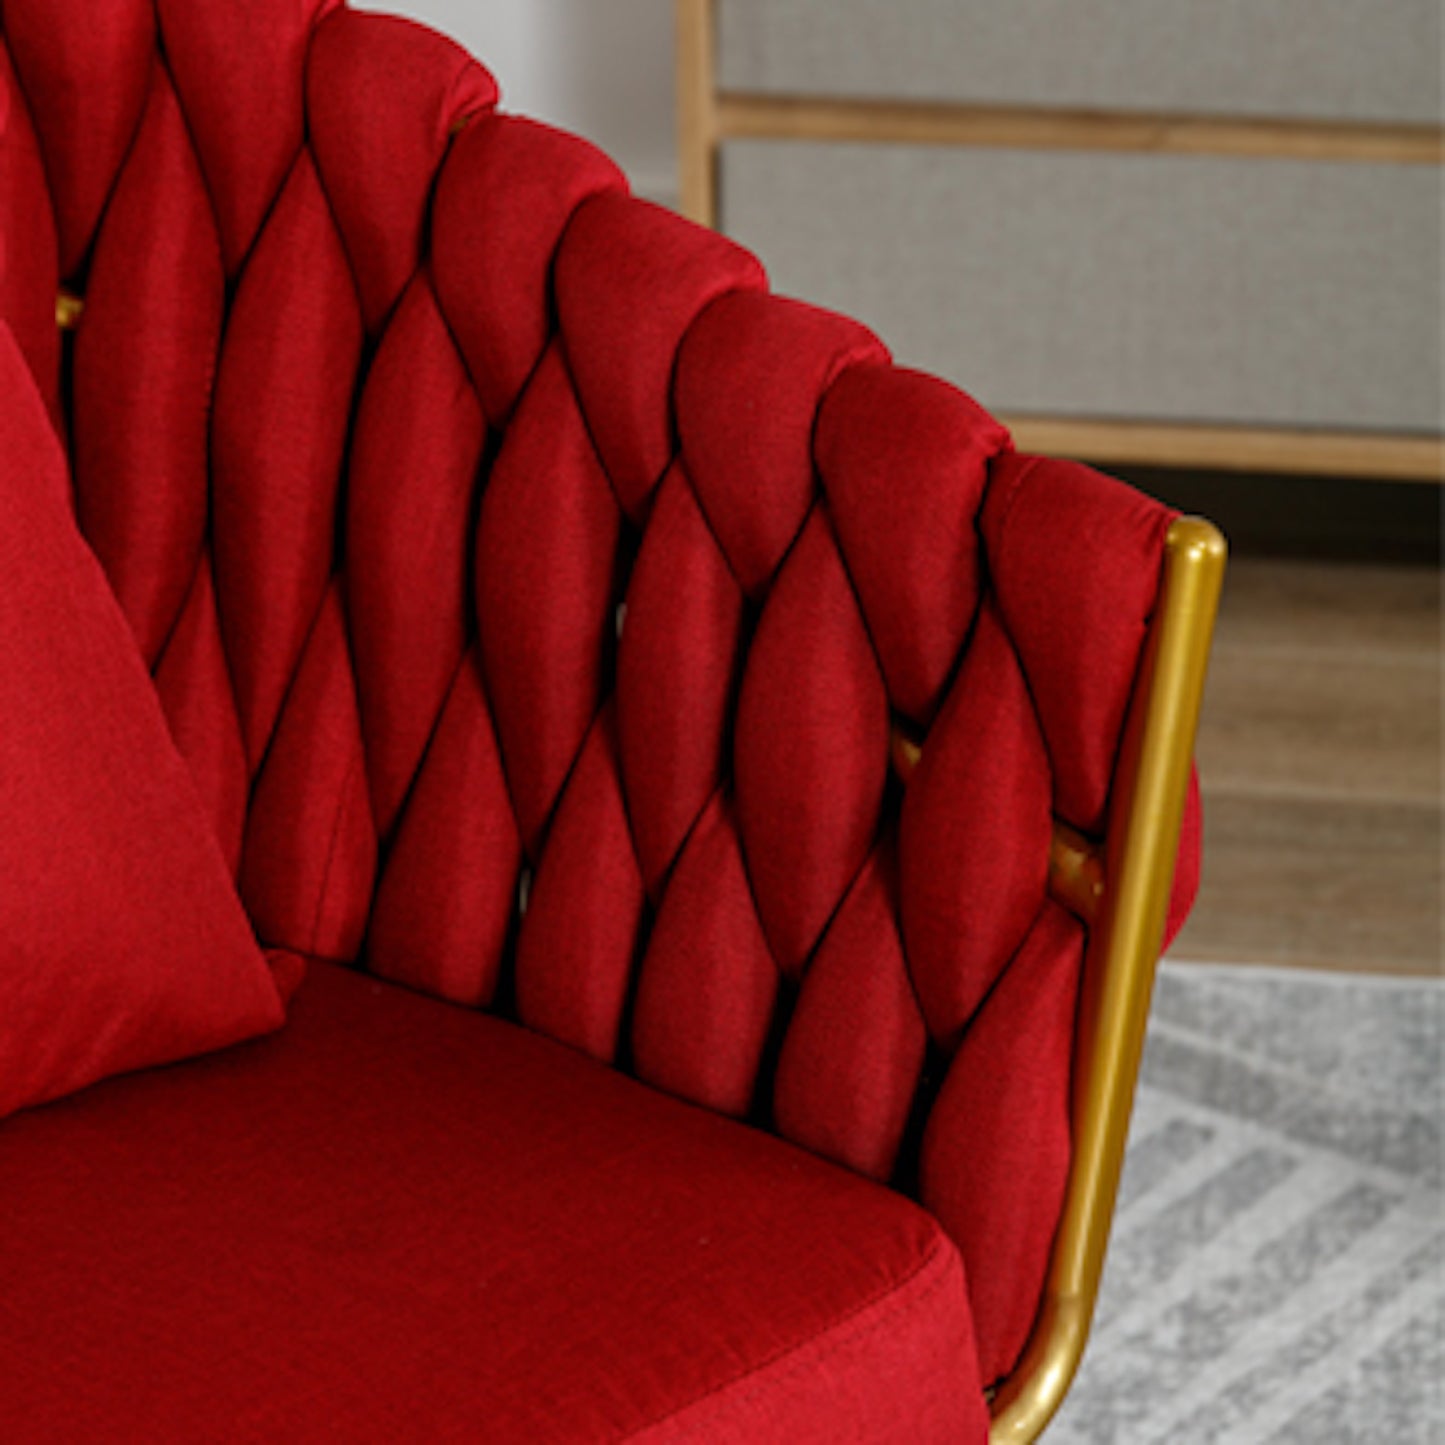 Léa Handwoven Linen Accent Chair with Golden Frame - Red